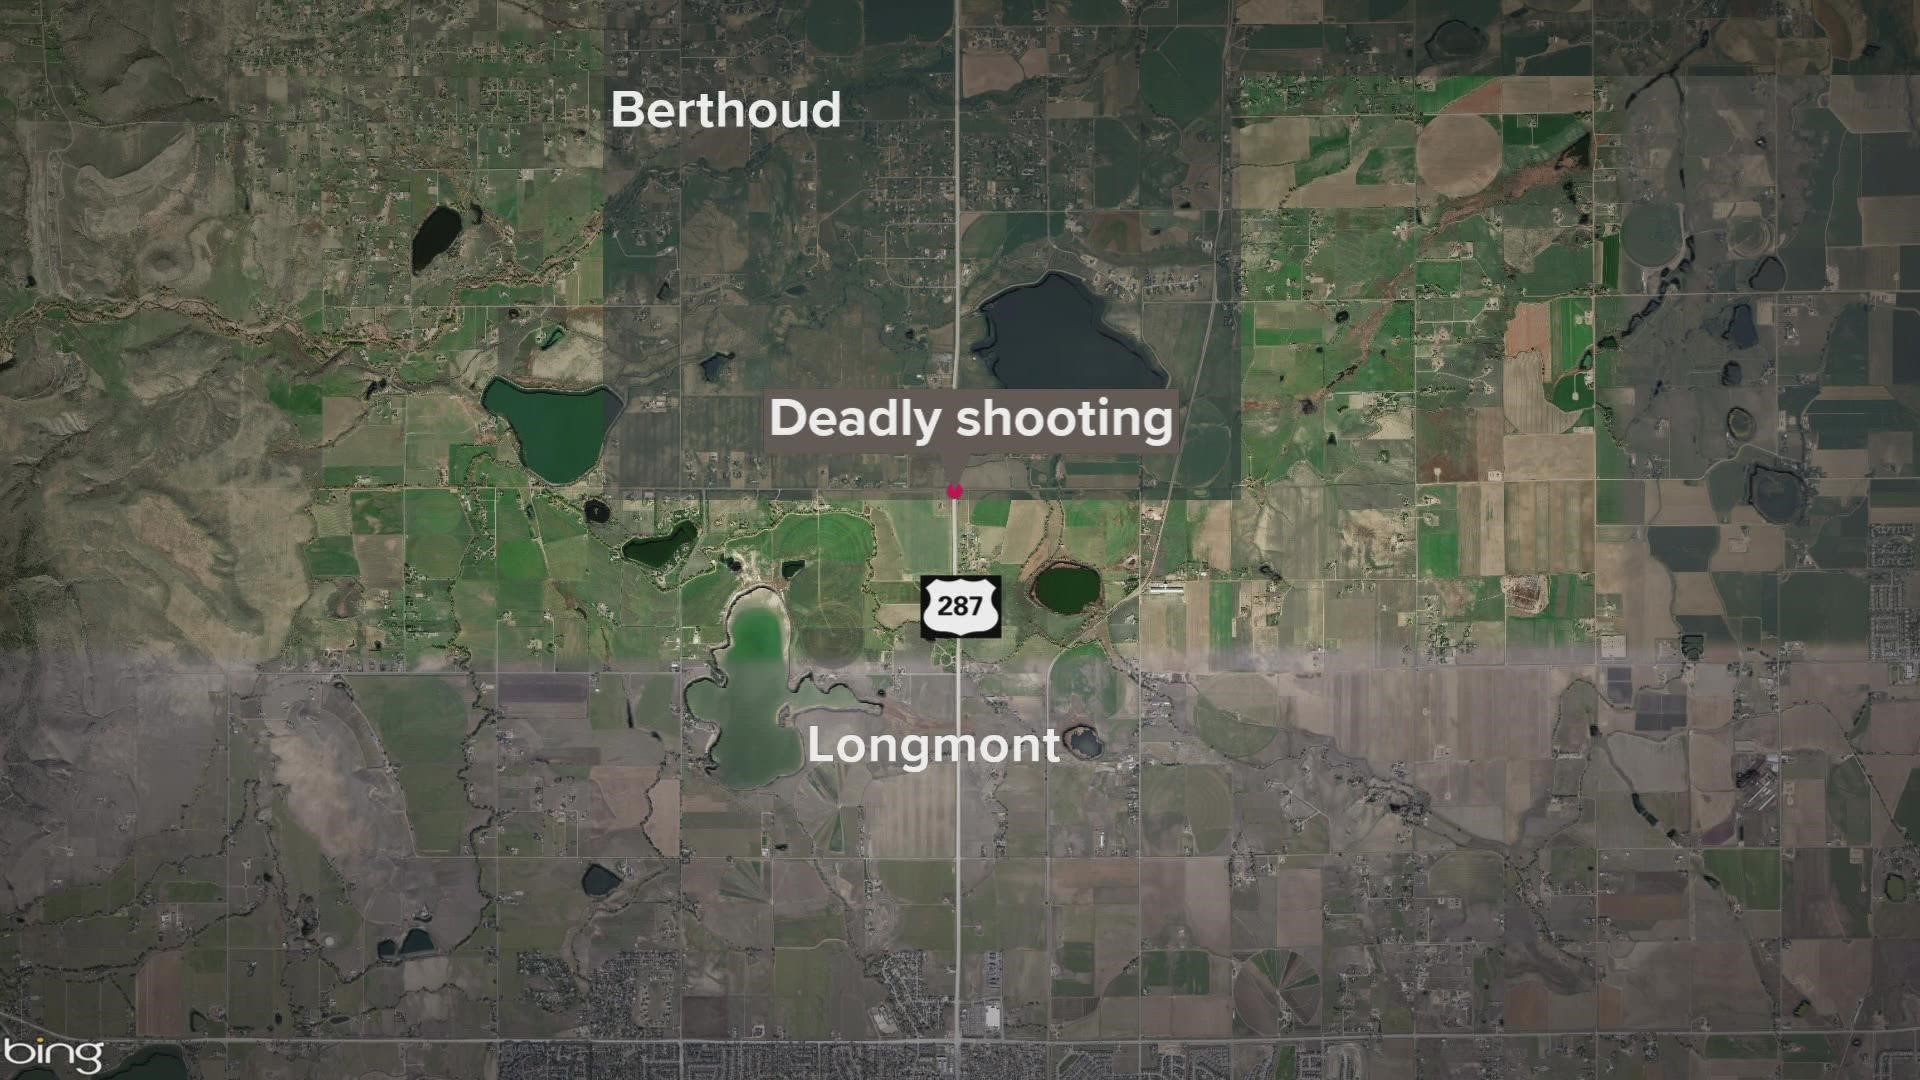 The victim was riding in a car when she was shot early Sunday morning in the area of Highway 287 and Yellowstone Road, deputies said.